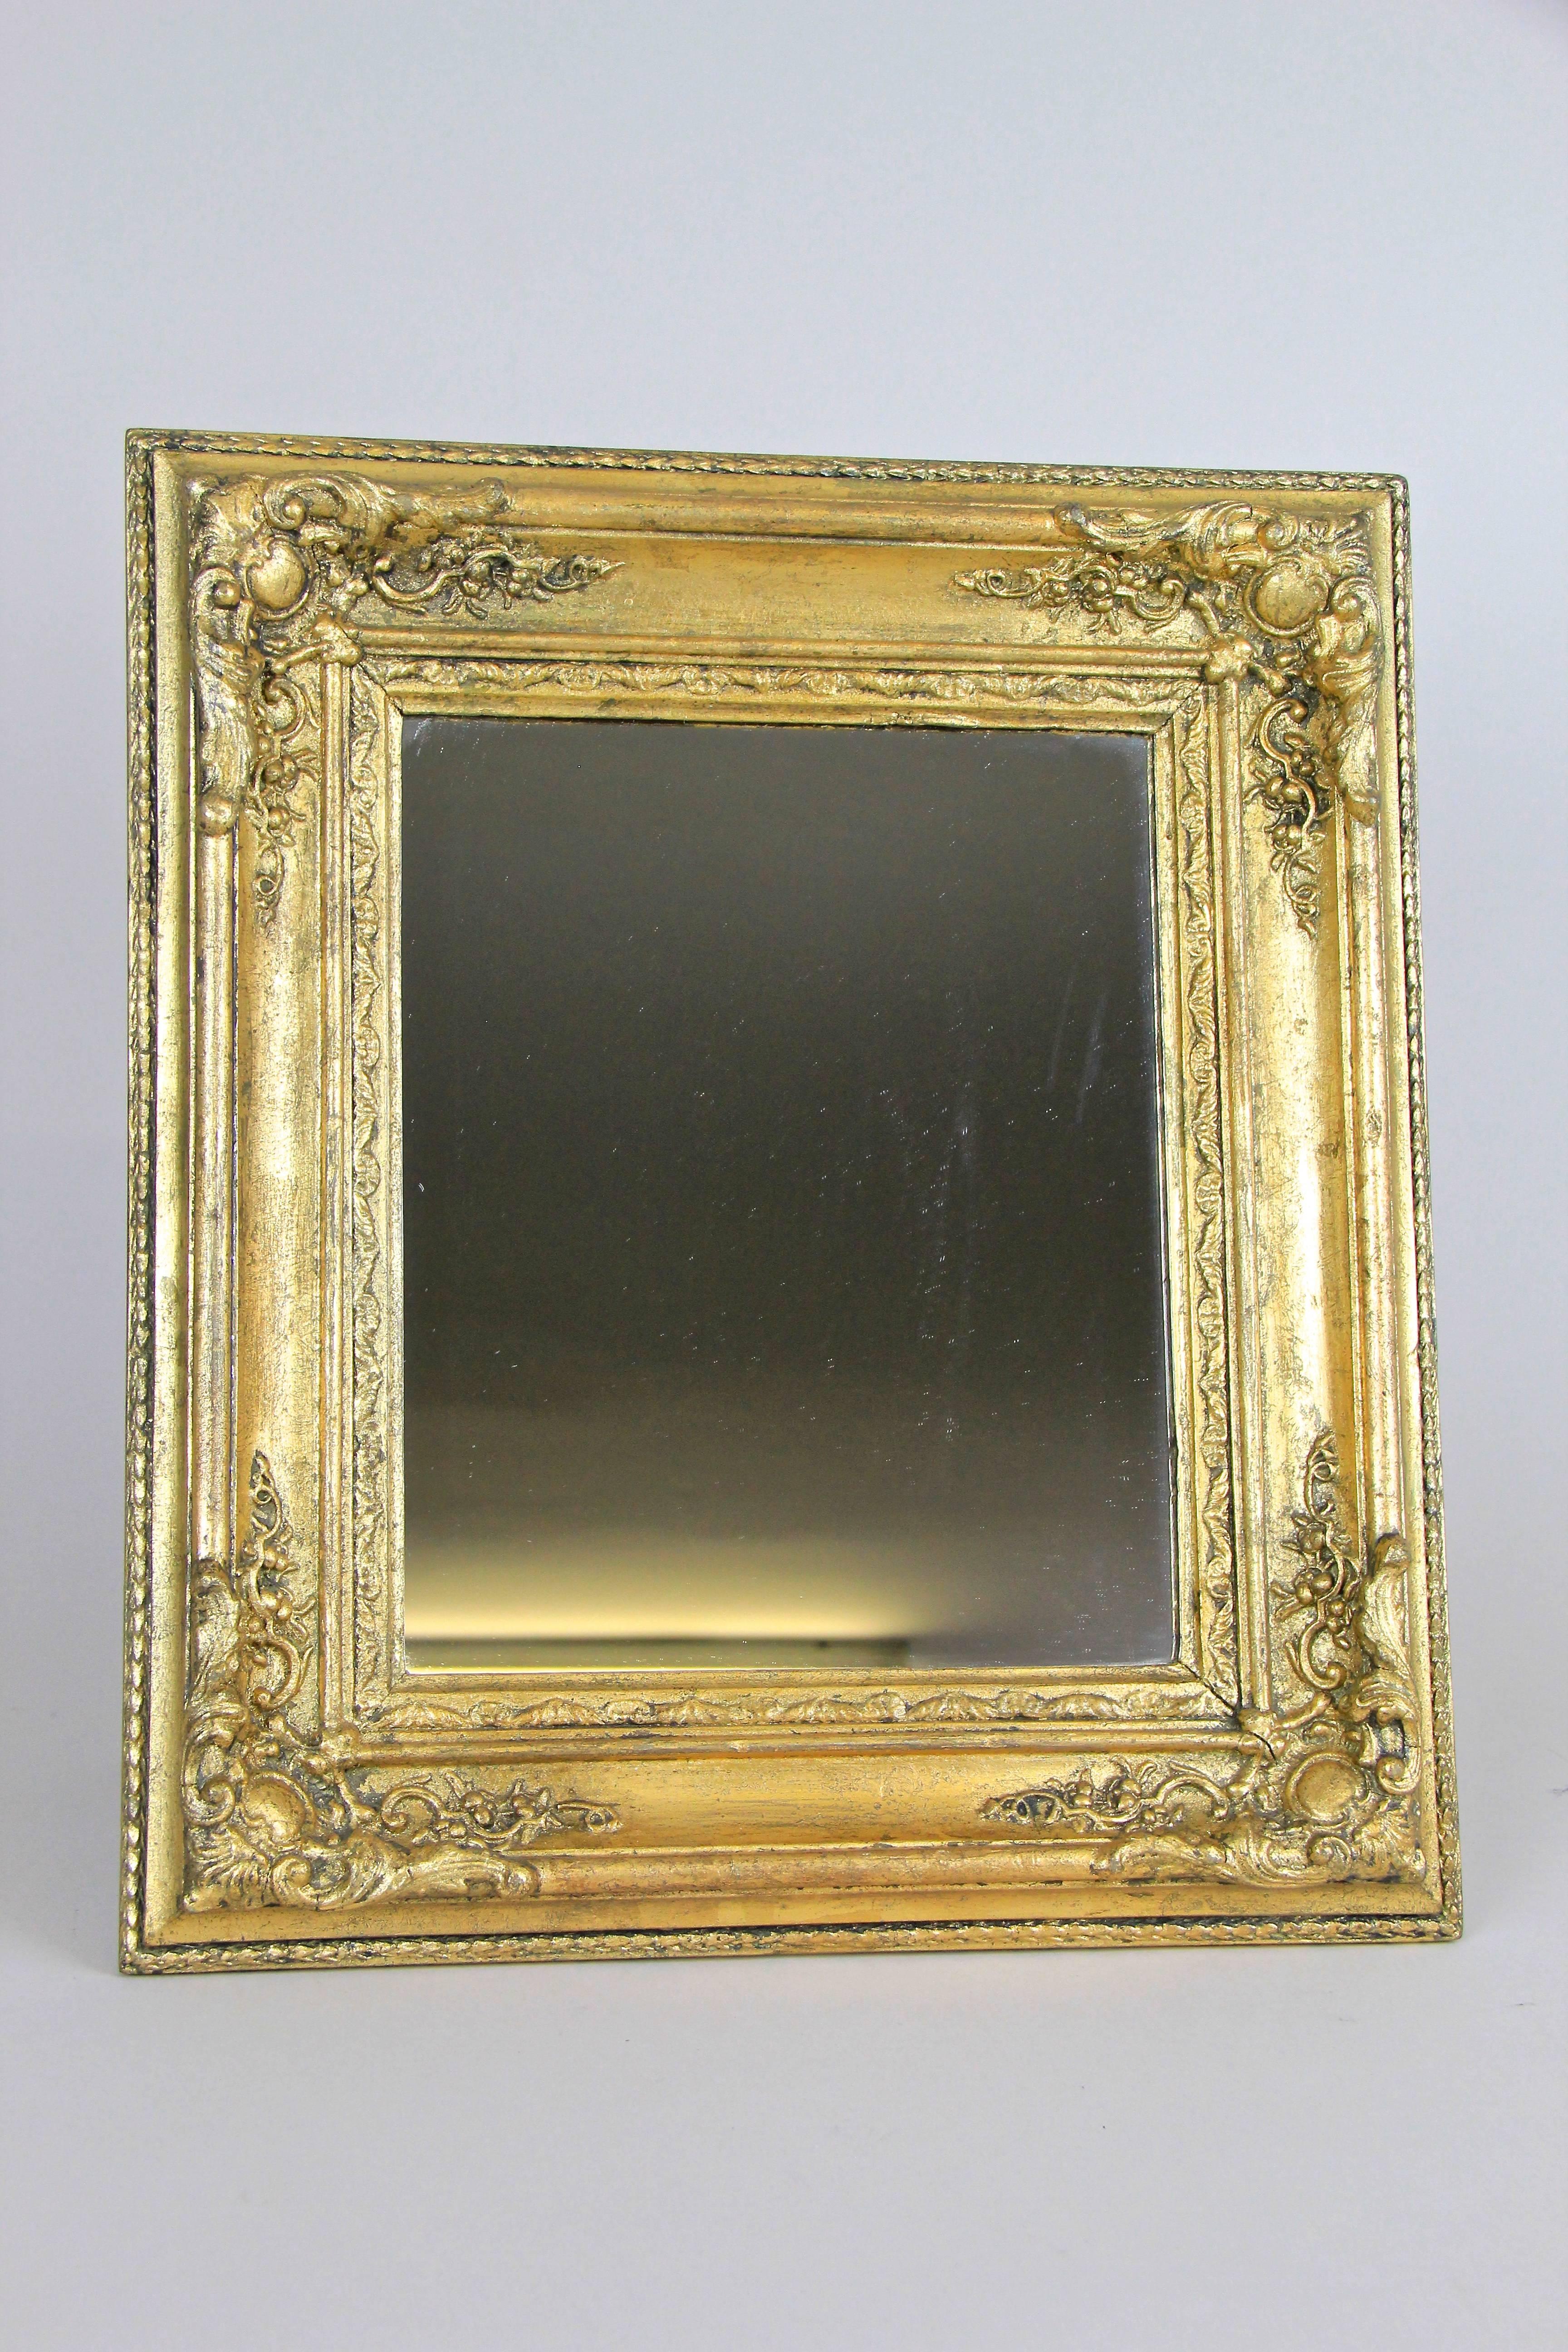 Beautiful golden Biedermeier wall or table mirror from the late Biedermeier period in France, circa 1860. This lovely small mirror or table mirror comes in absolute great original condition, only the old mirror glass was renewed. The broad frame